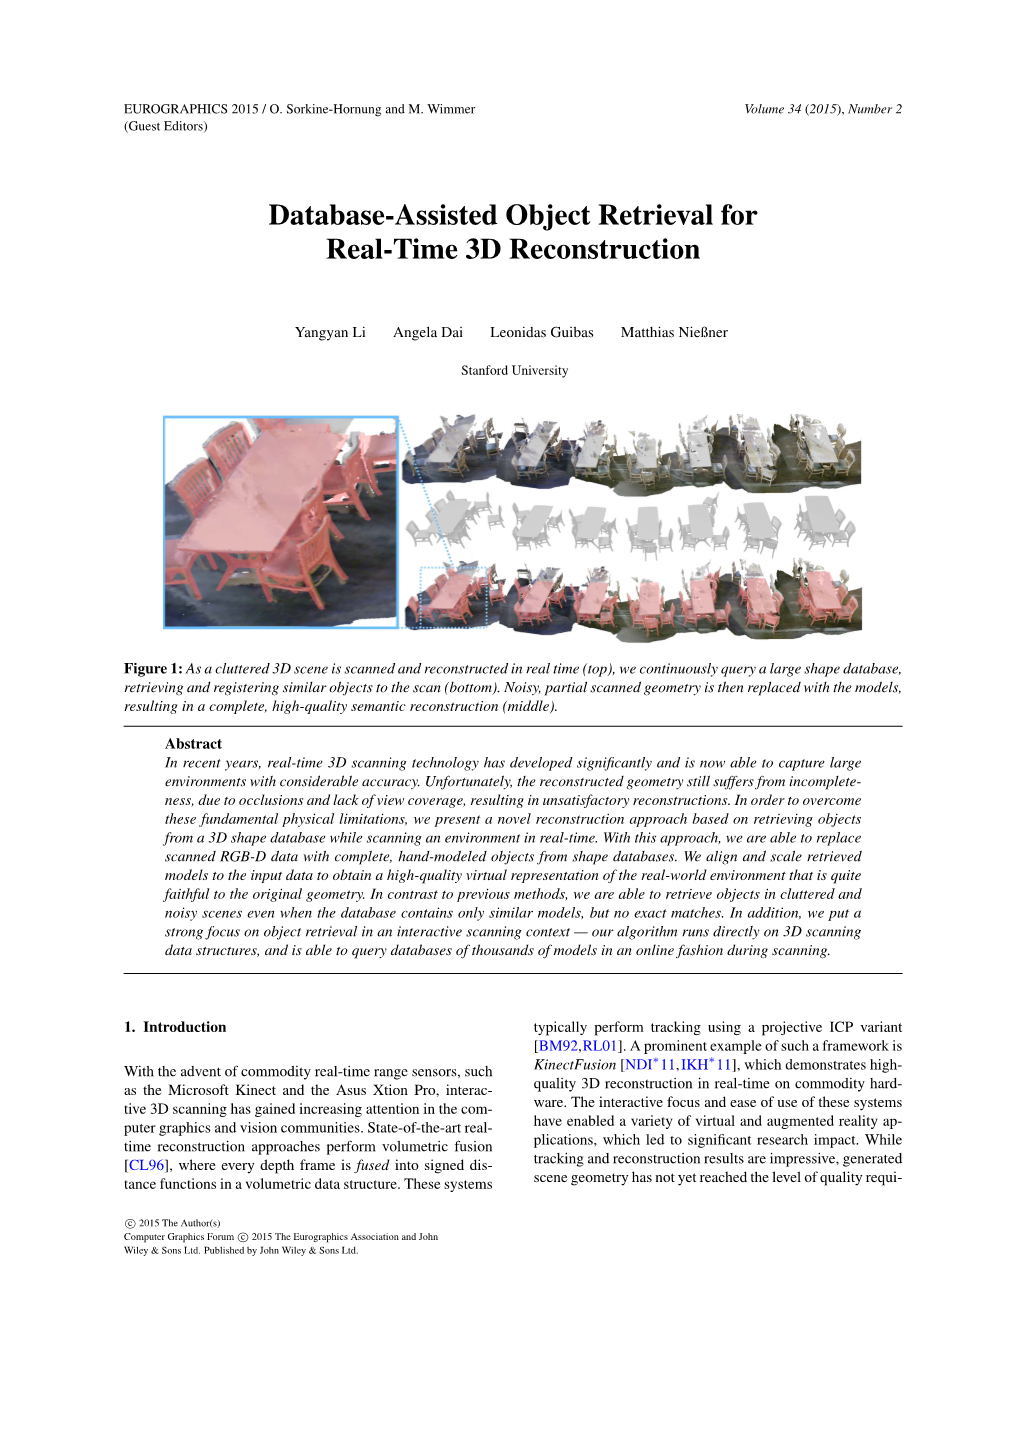 Database-Assisted Object Retrieval for Real-Time 3D Reconstruction